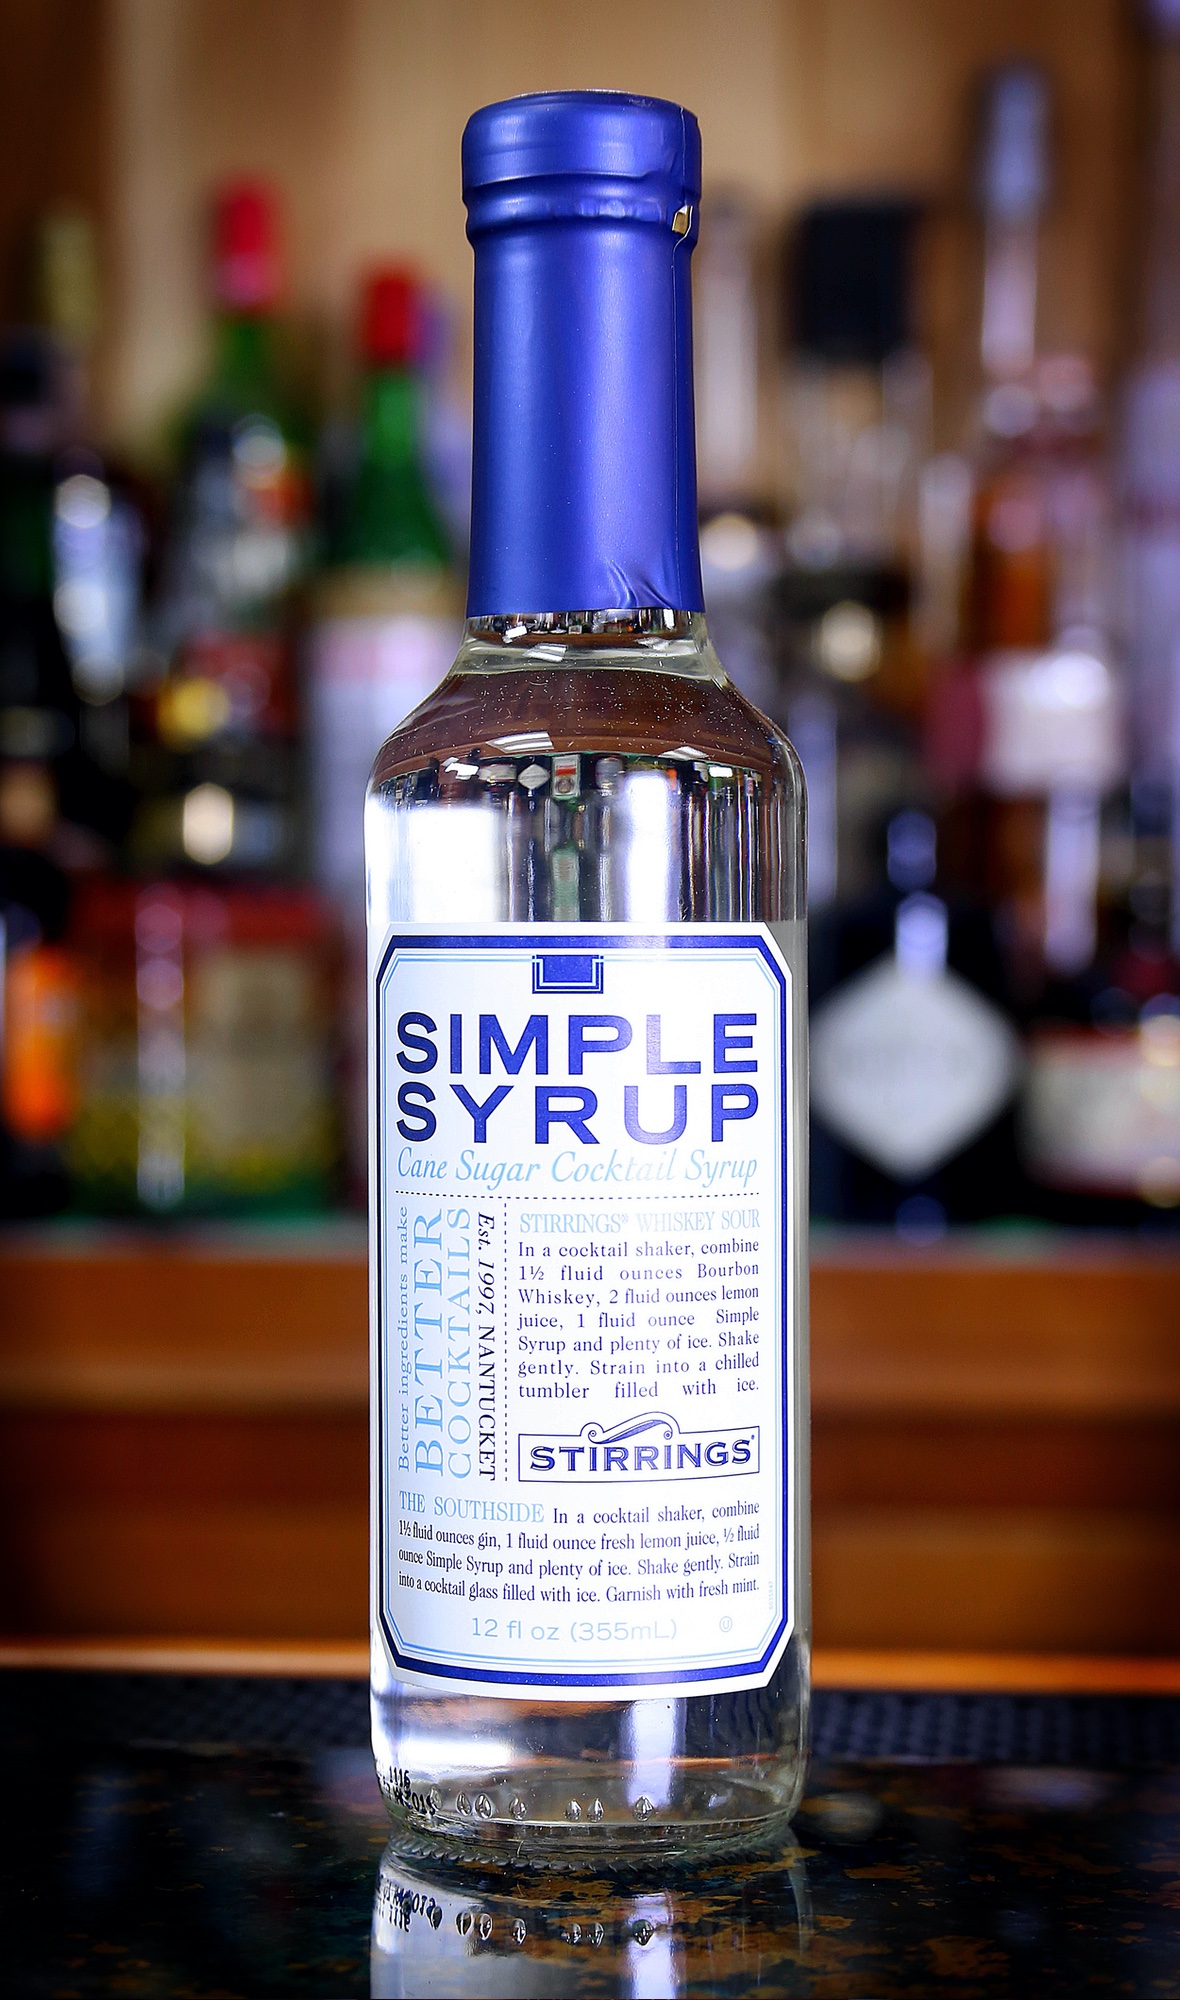 What is Simple Syrup?